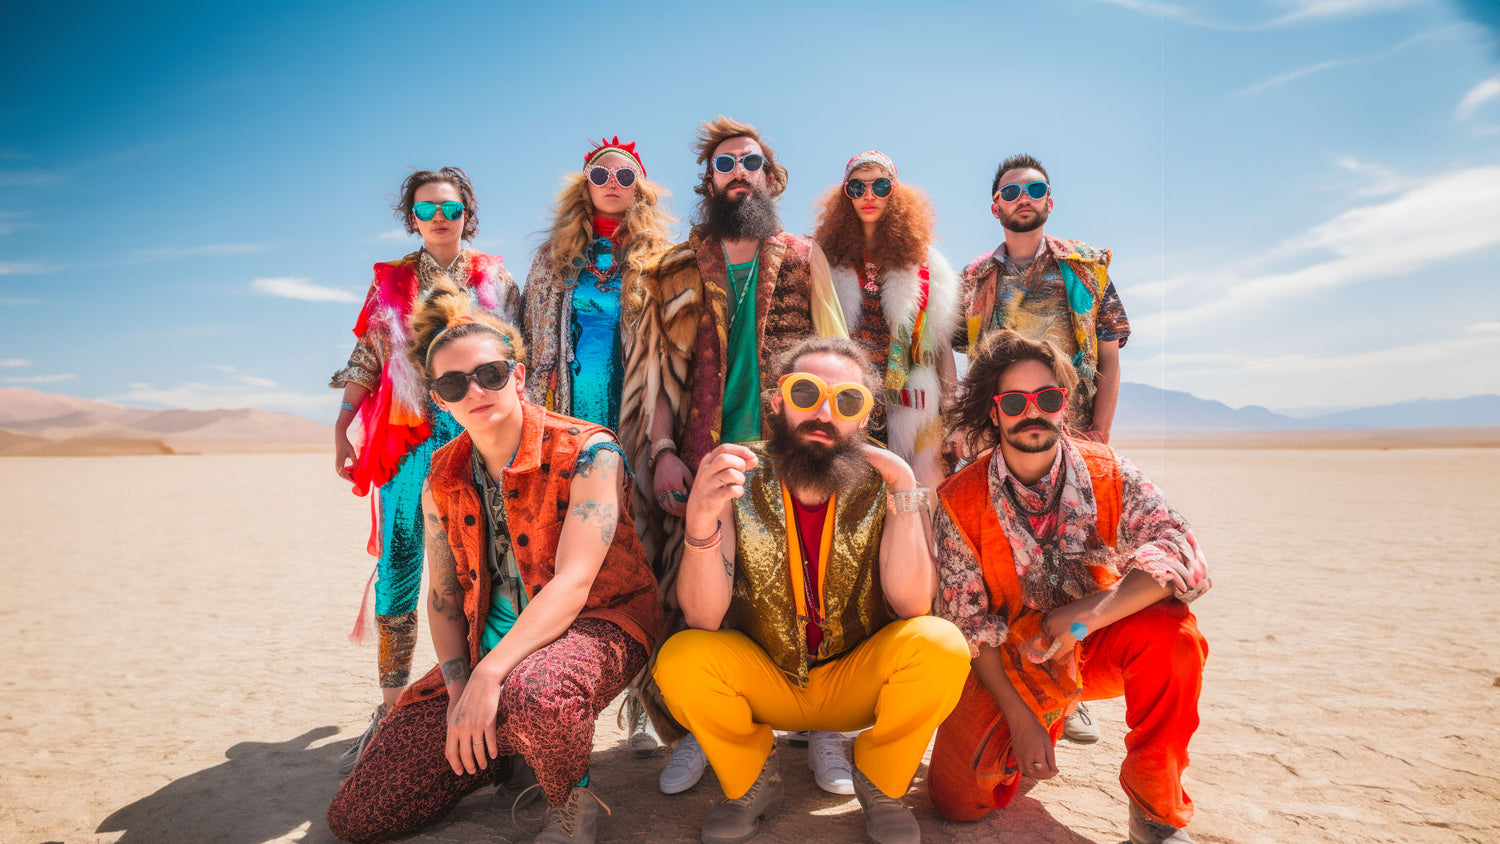 A colorful group of people from burning man wearing sunglasses